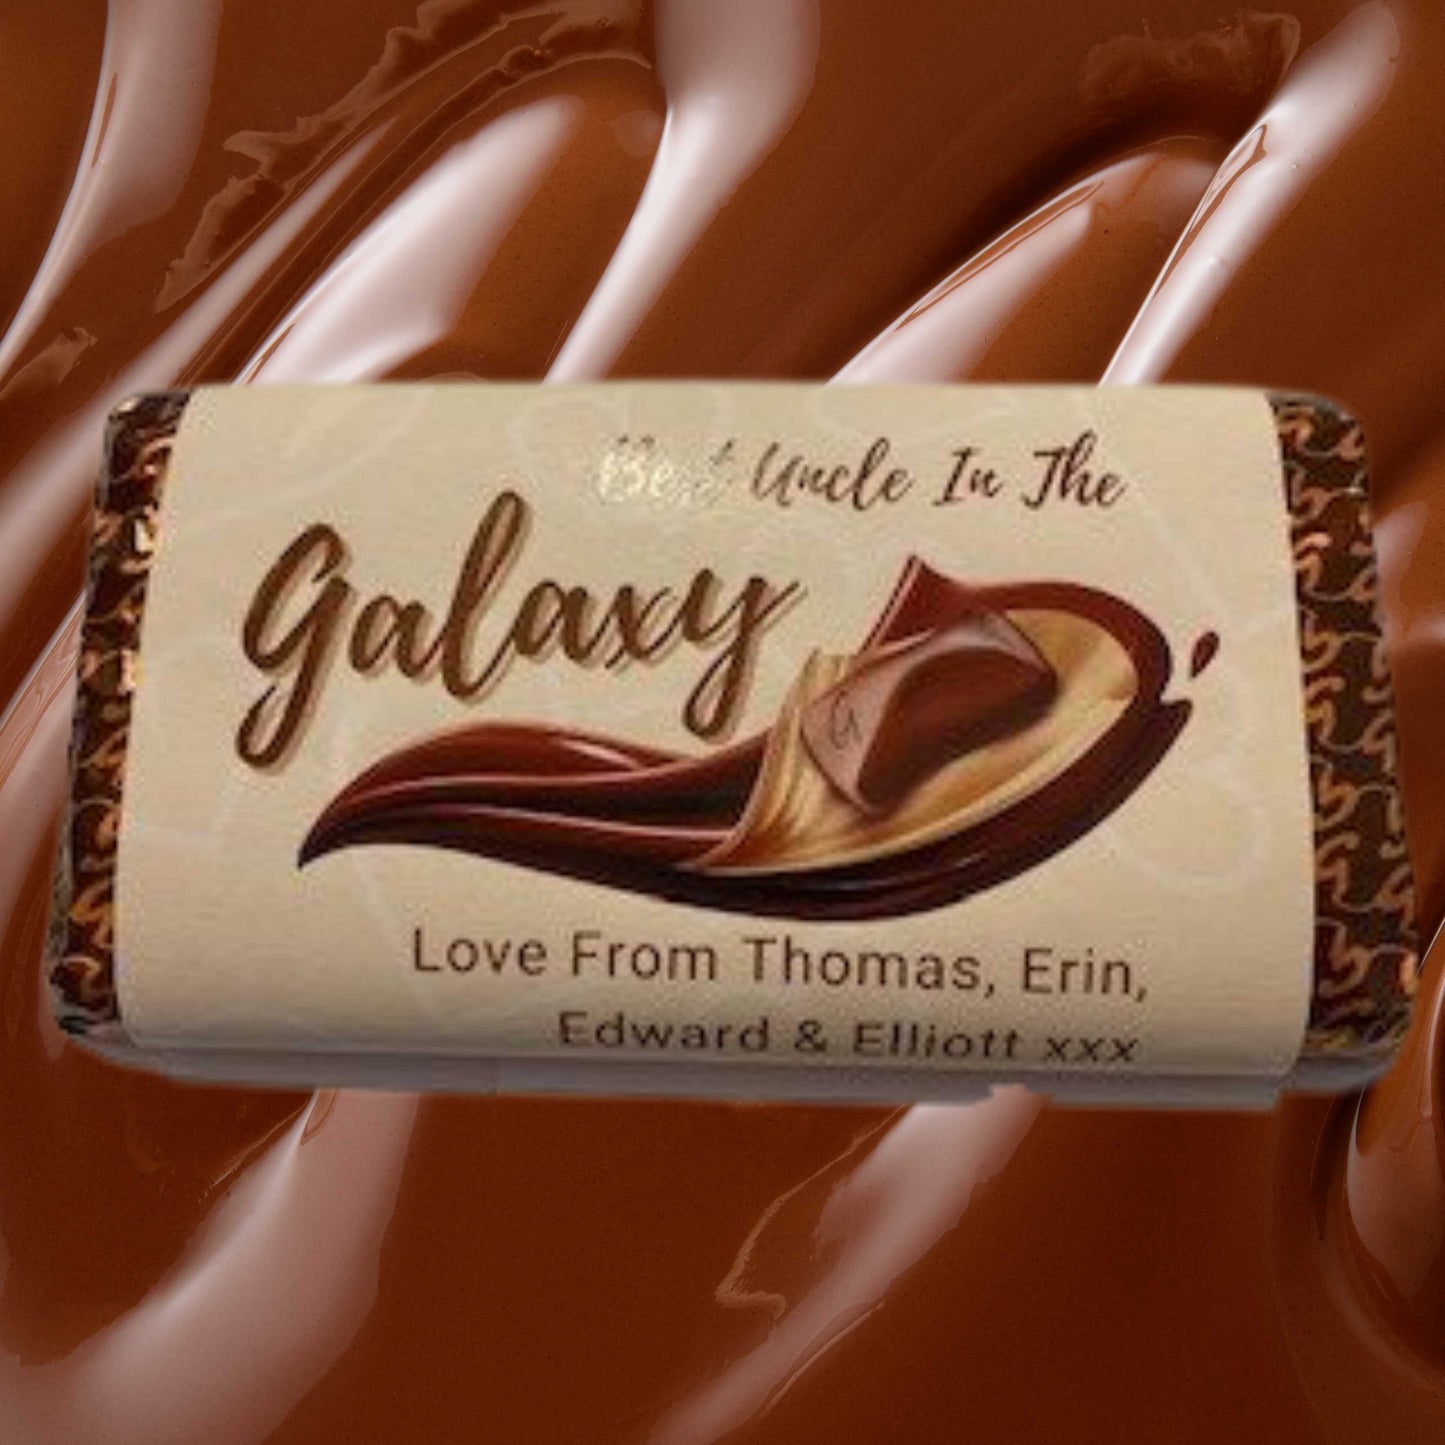 Best Uncle in the Galaxy wrapped bar of Galaxy chocolate personalised